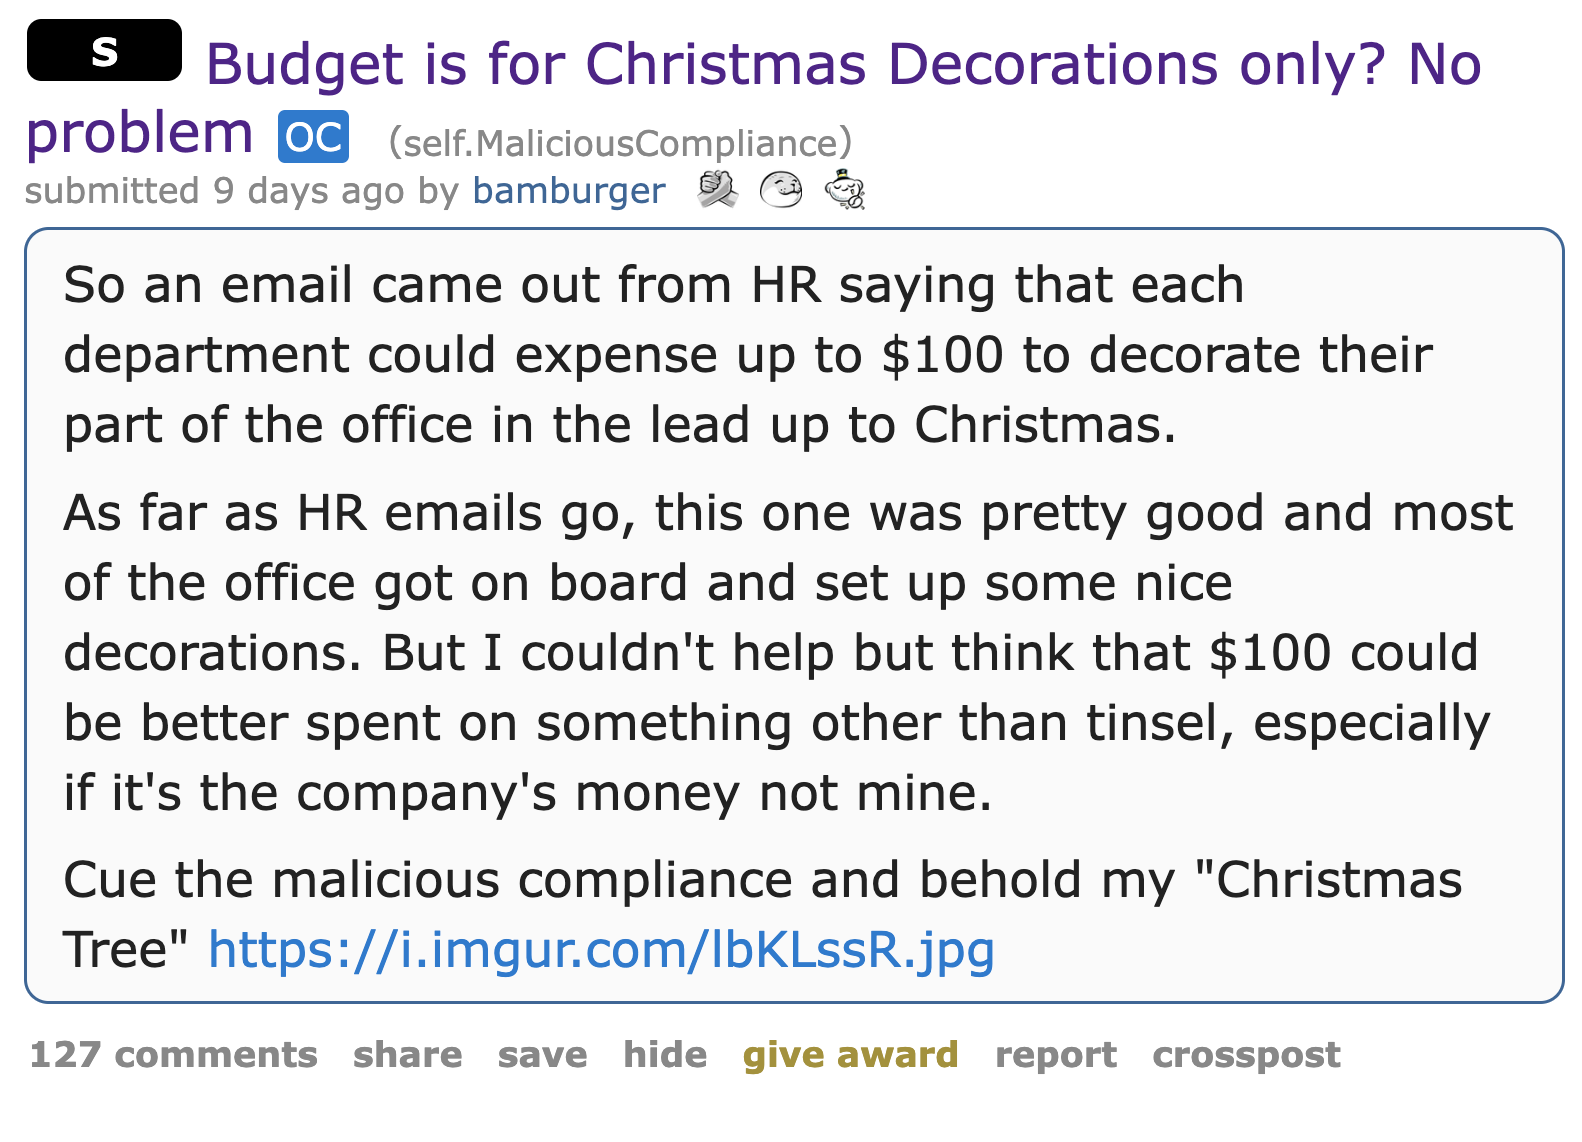 holiday Christmas budget malicious compliance - - S Budget is for Christmas Decorations only? No problem oc self.MaliciousCompliance submitted 9 days ago by bamburger So an email came out from Hr saying that each department could expense up to $100 to dec